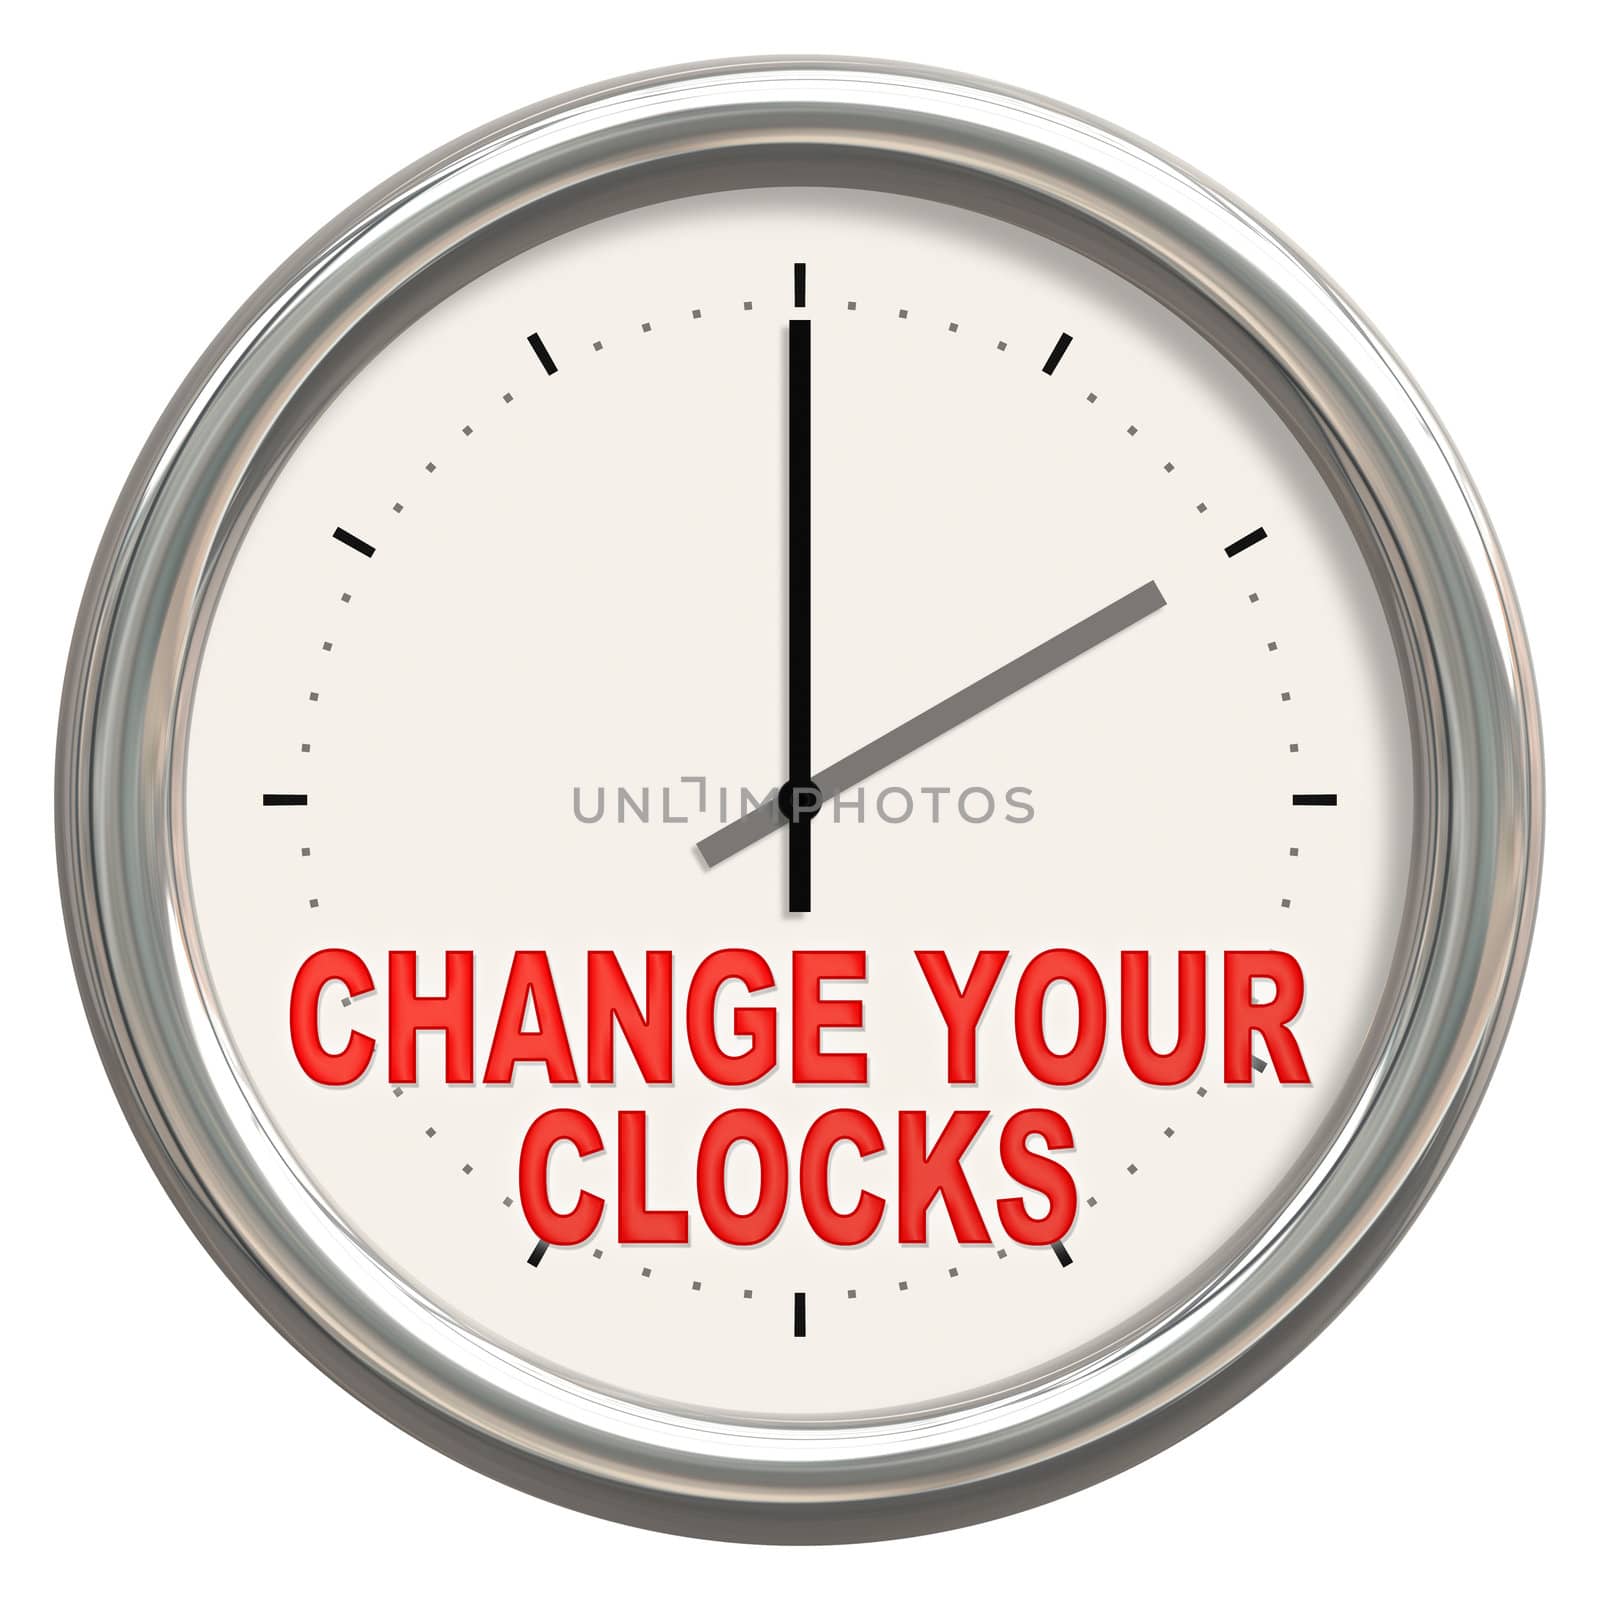 An image of a nice clock with "change your clocks"